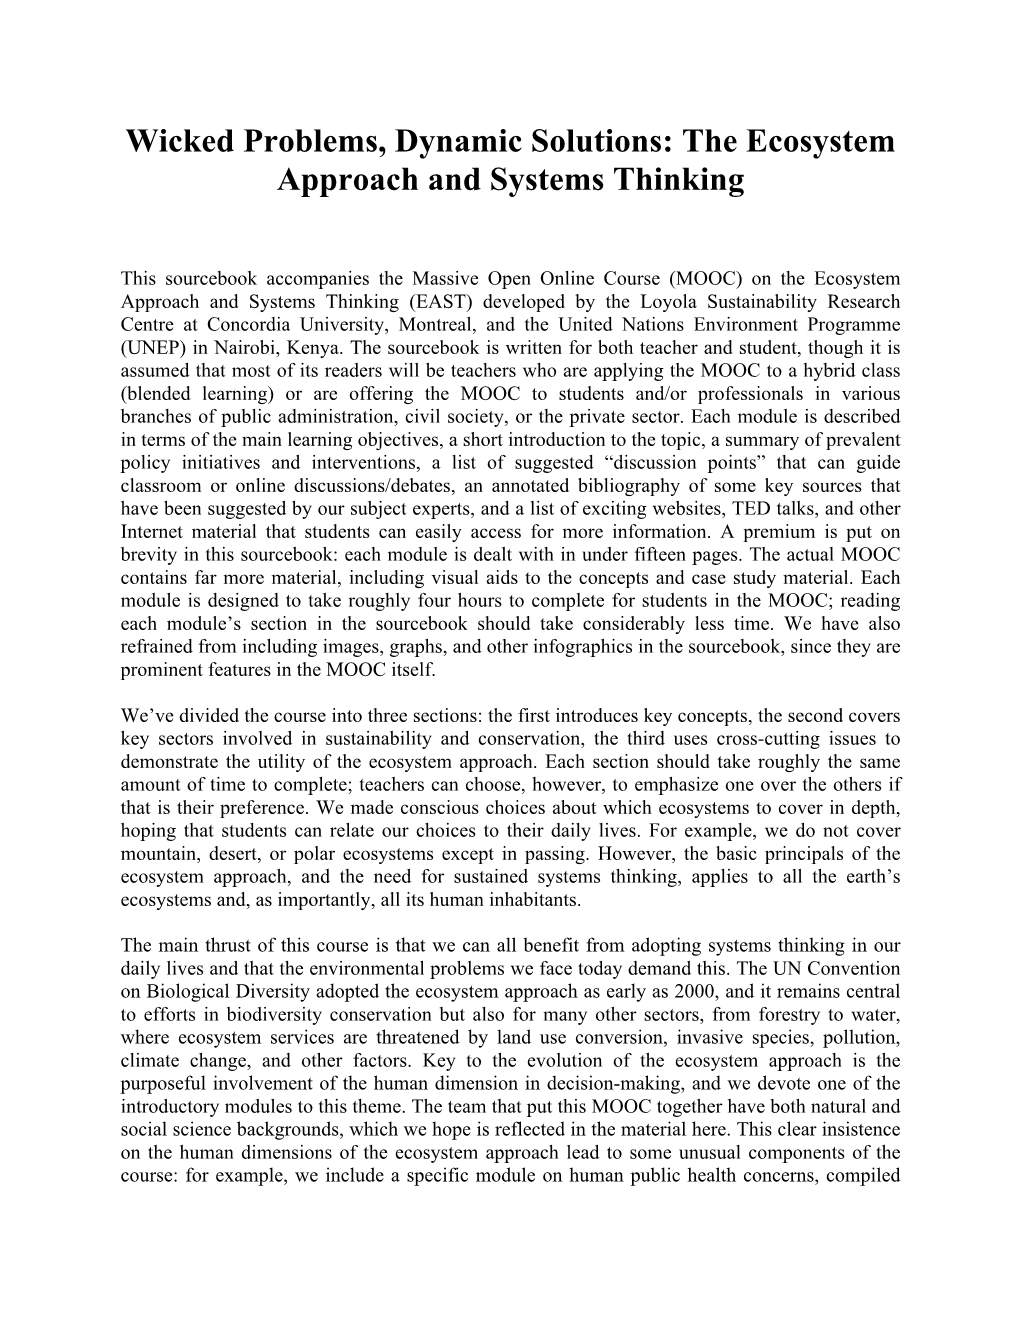 The Ecosystem Approach and Systems Thinking